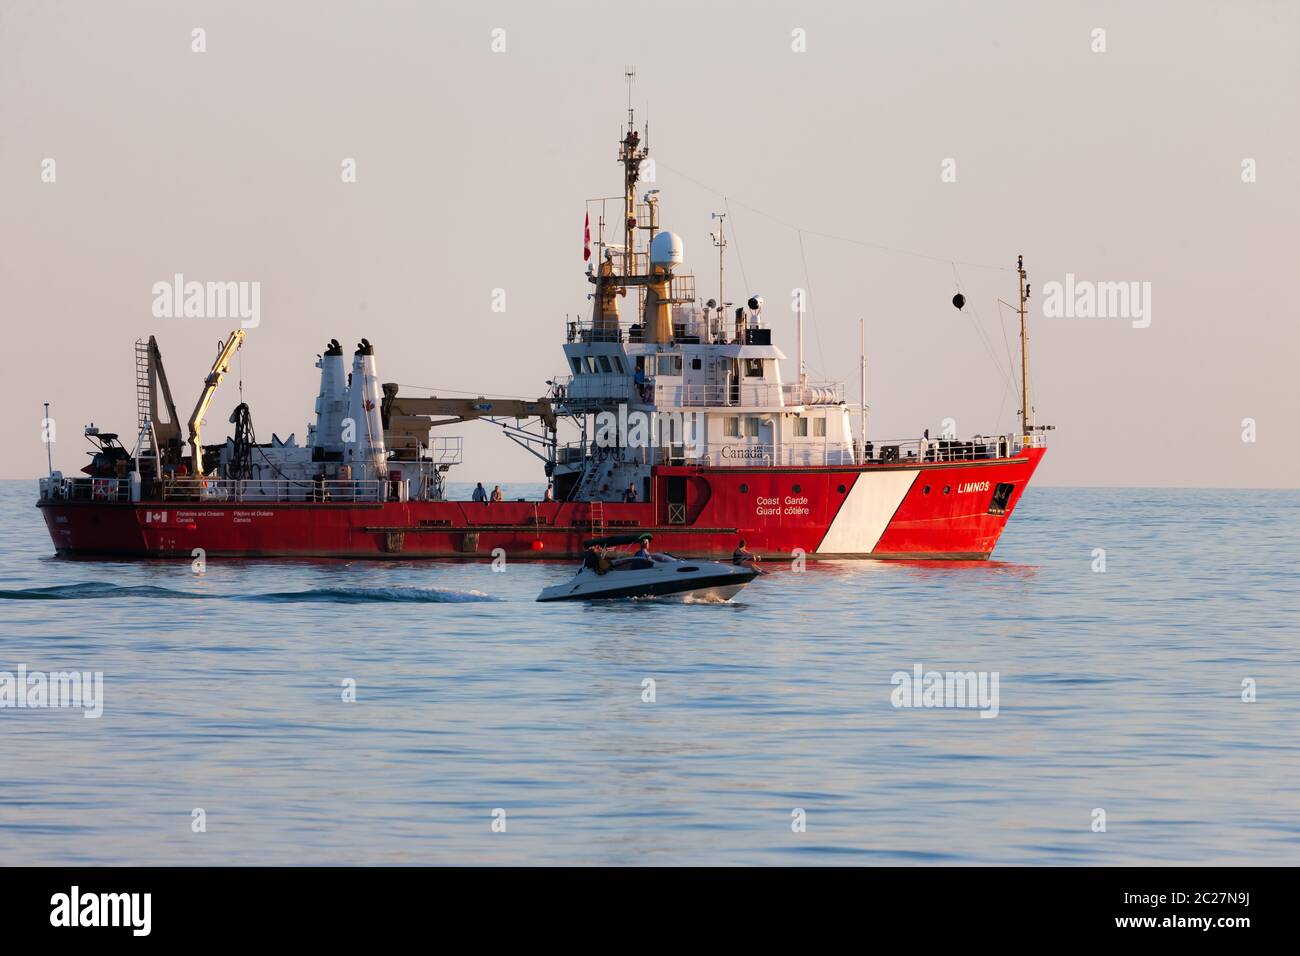 Port Stanley, Canada - June 16, 2020. The Canadian Coast Guard Ship Limnos sits anchored on Lake Erie off the beach at Port Stanley while the ship and crew conduct training exercises. Mark Spowart/Alamy Live News. Stock Photo